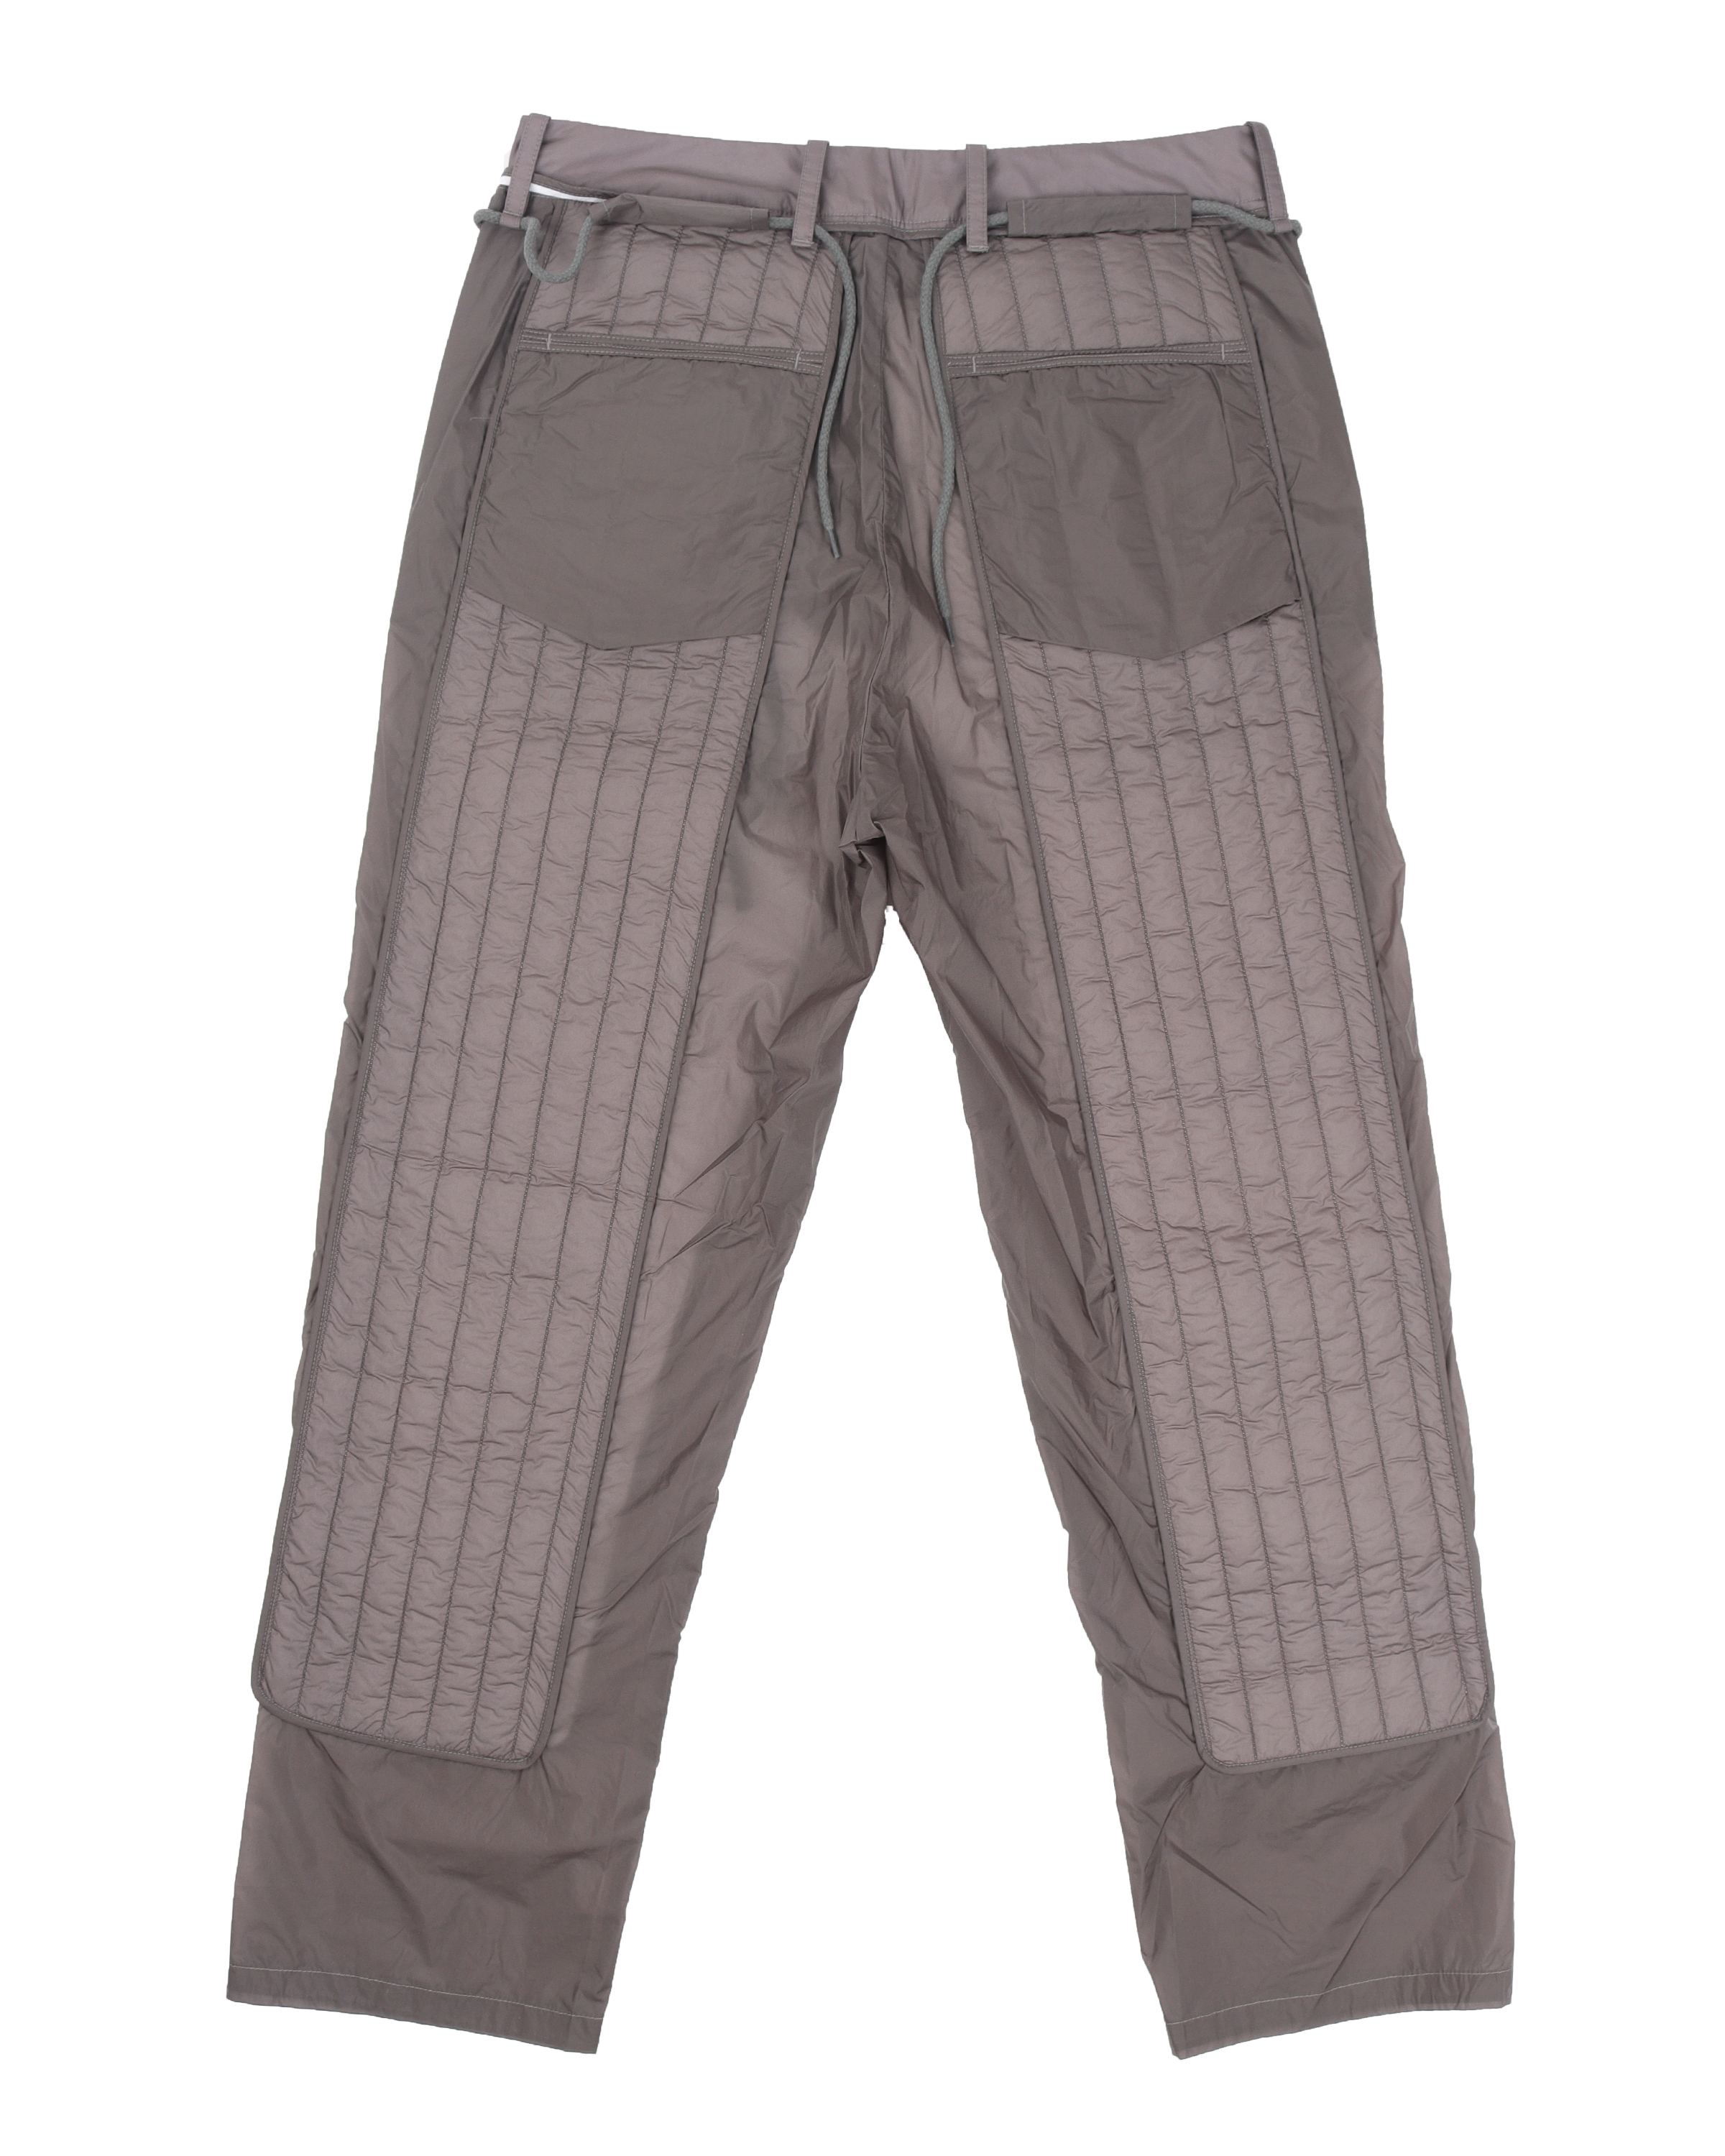 S/S 20 'Skin' Quilted Nylon Trousers